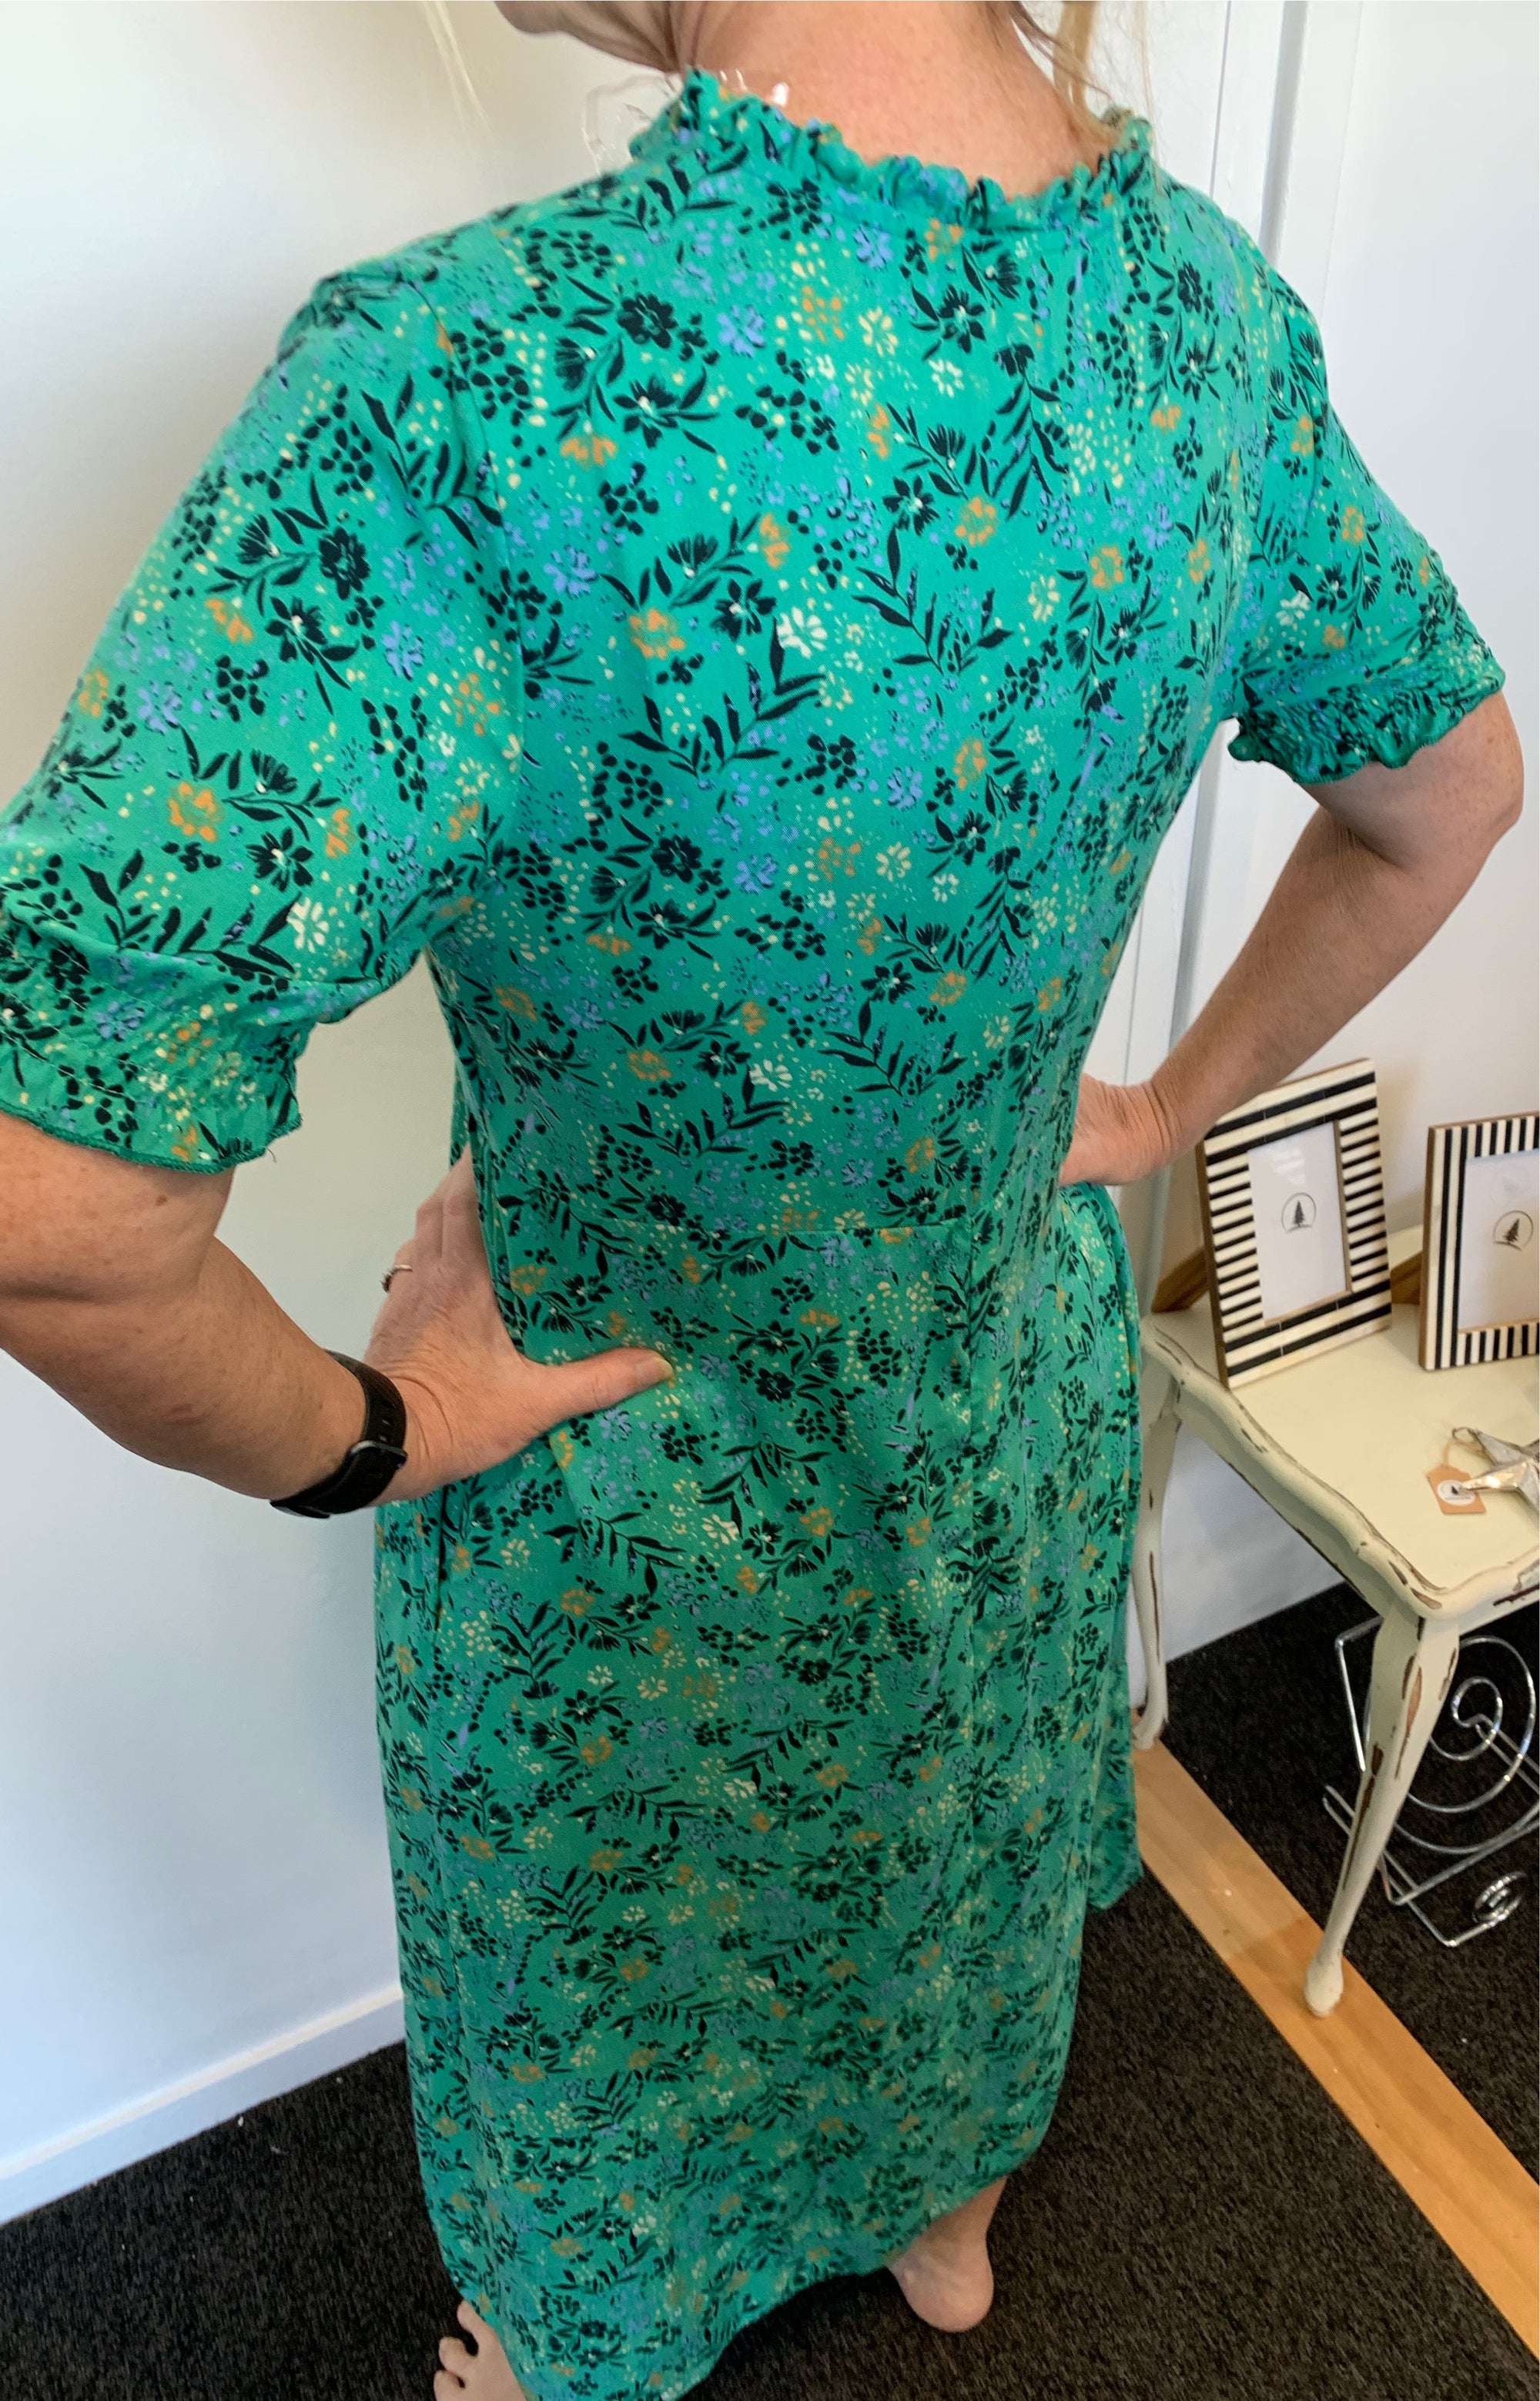 Teal Coloured A-Line Dress with Floral Print Pockets & Frill Neck - Silver Wishes